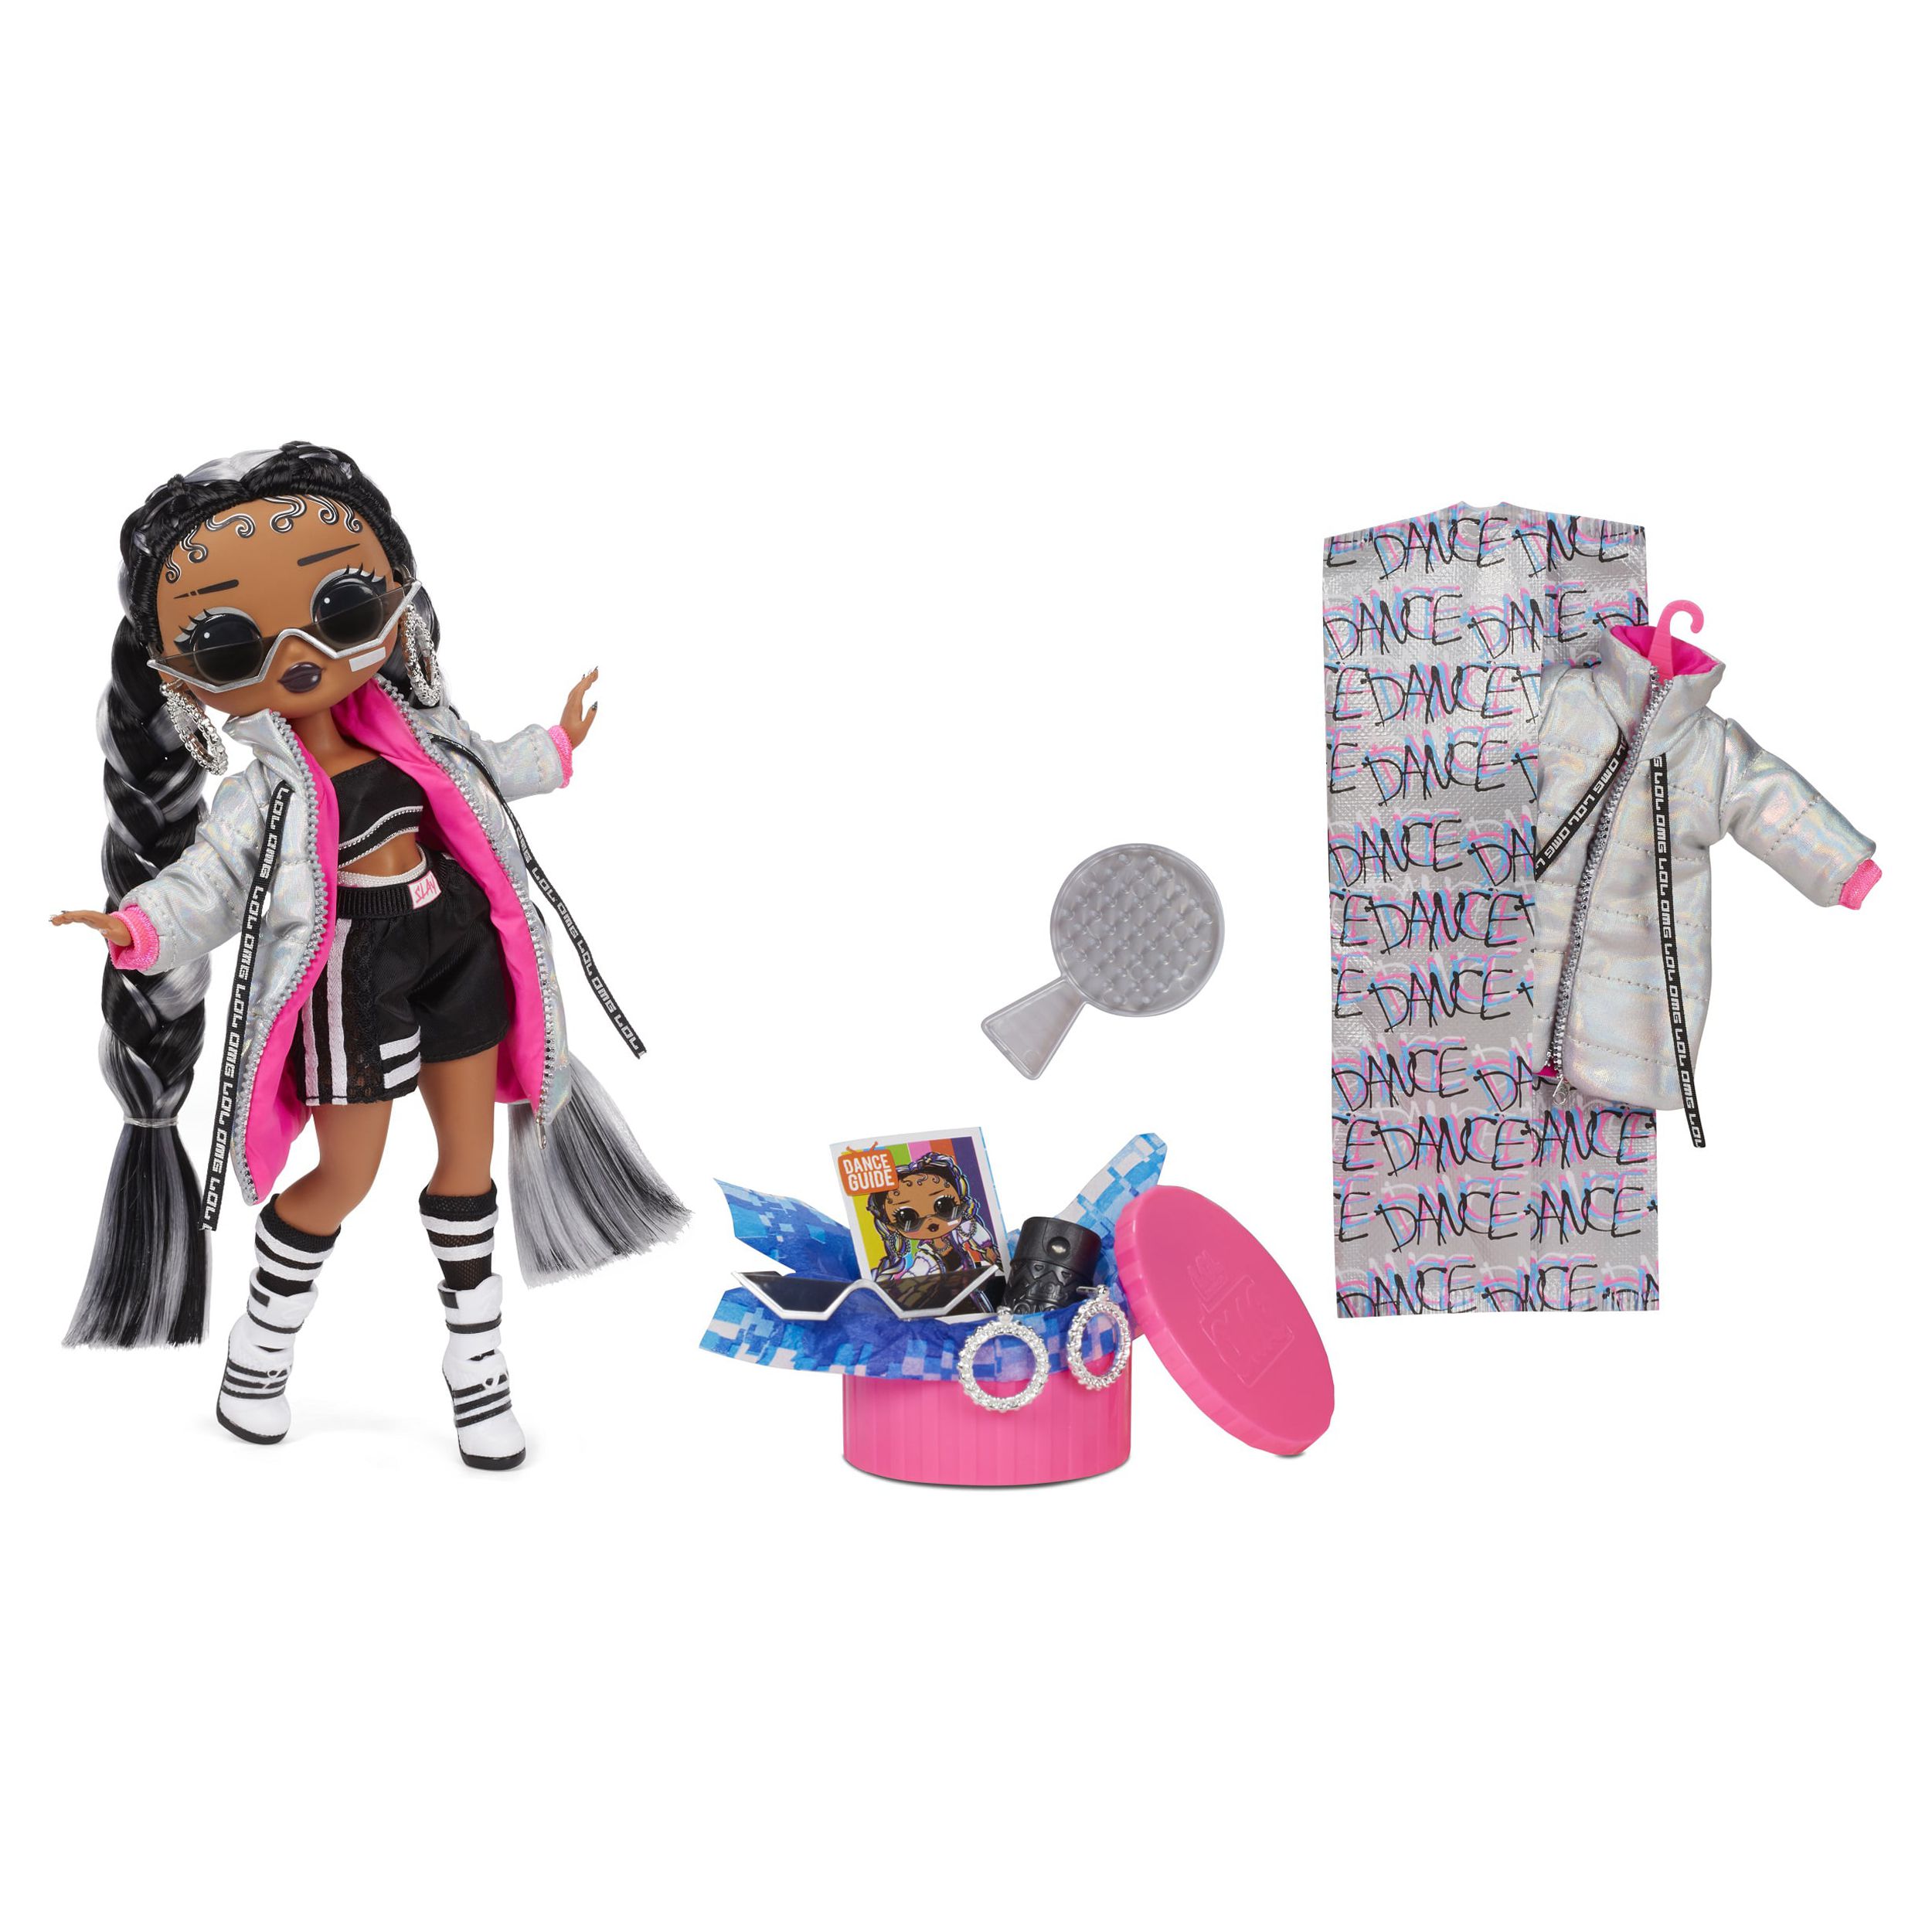 LOL Surprise OMG Dance Dance Dance B-Gurl Fashion Doll With 15 Surprises Including Magic Blacklight, Shoes, Hair Brush, Doll Stand and TV Package - For Girls Ages 4+ - image 5 of 7